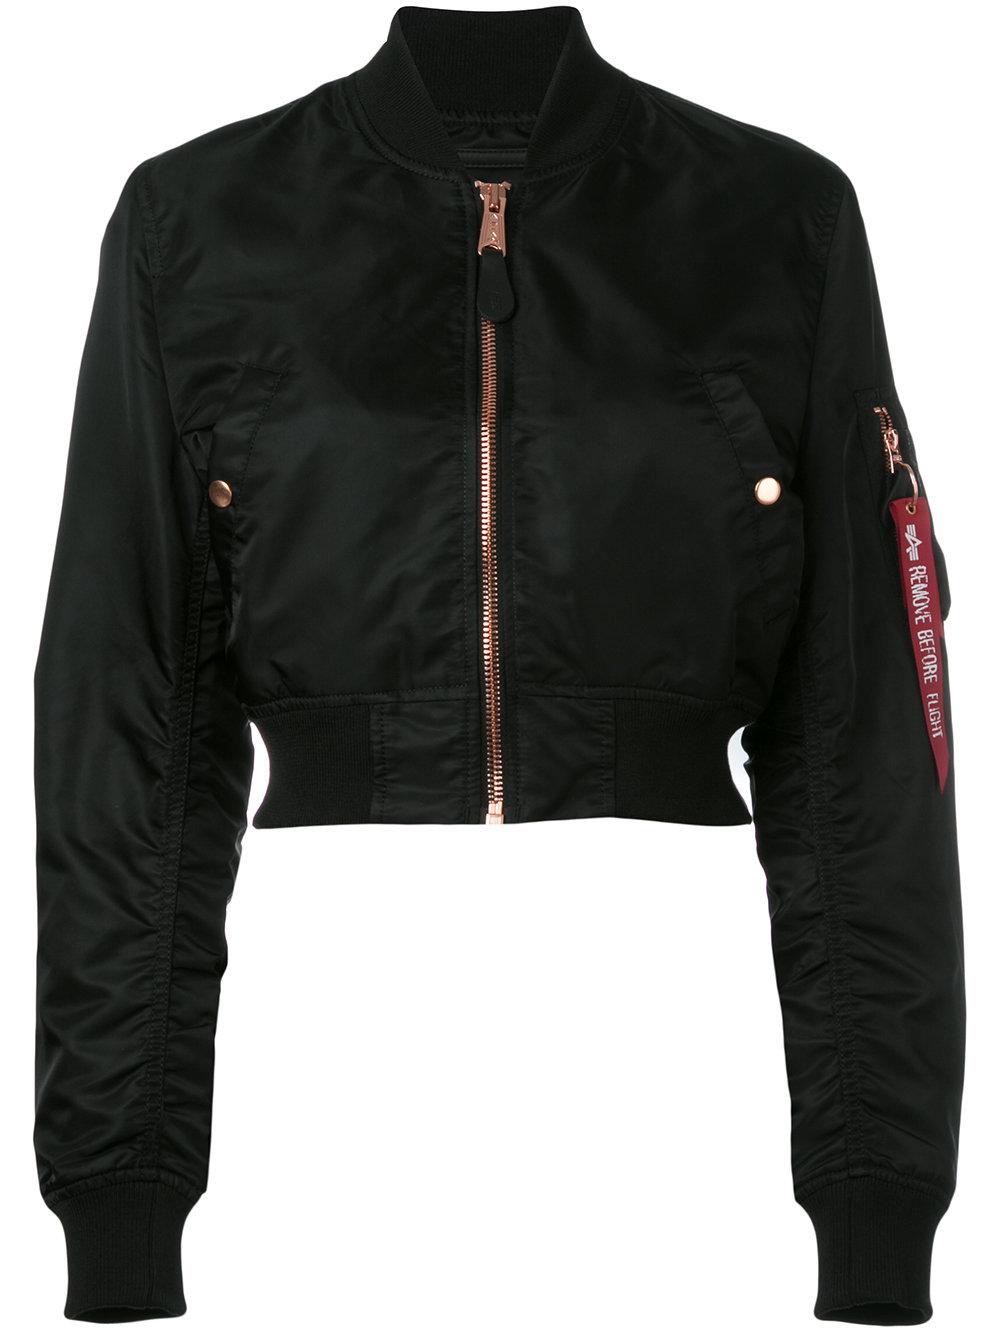 Lyst - Alpha Industries Cropped Bomber Jacket in Black